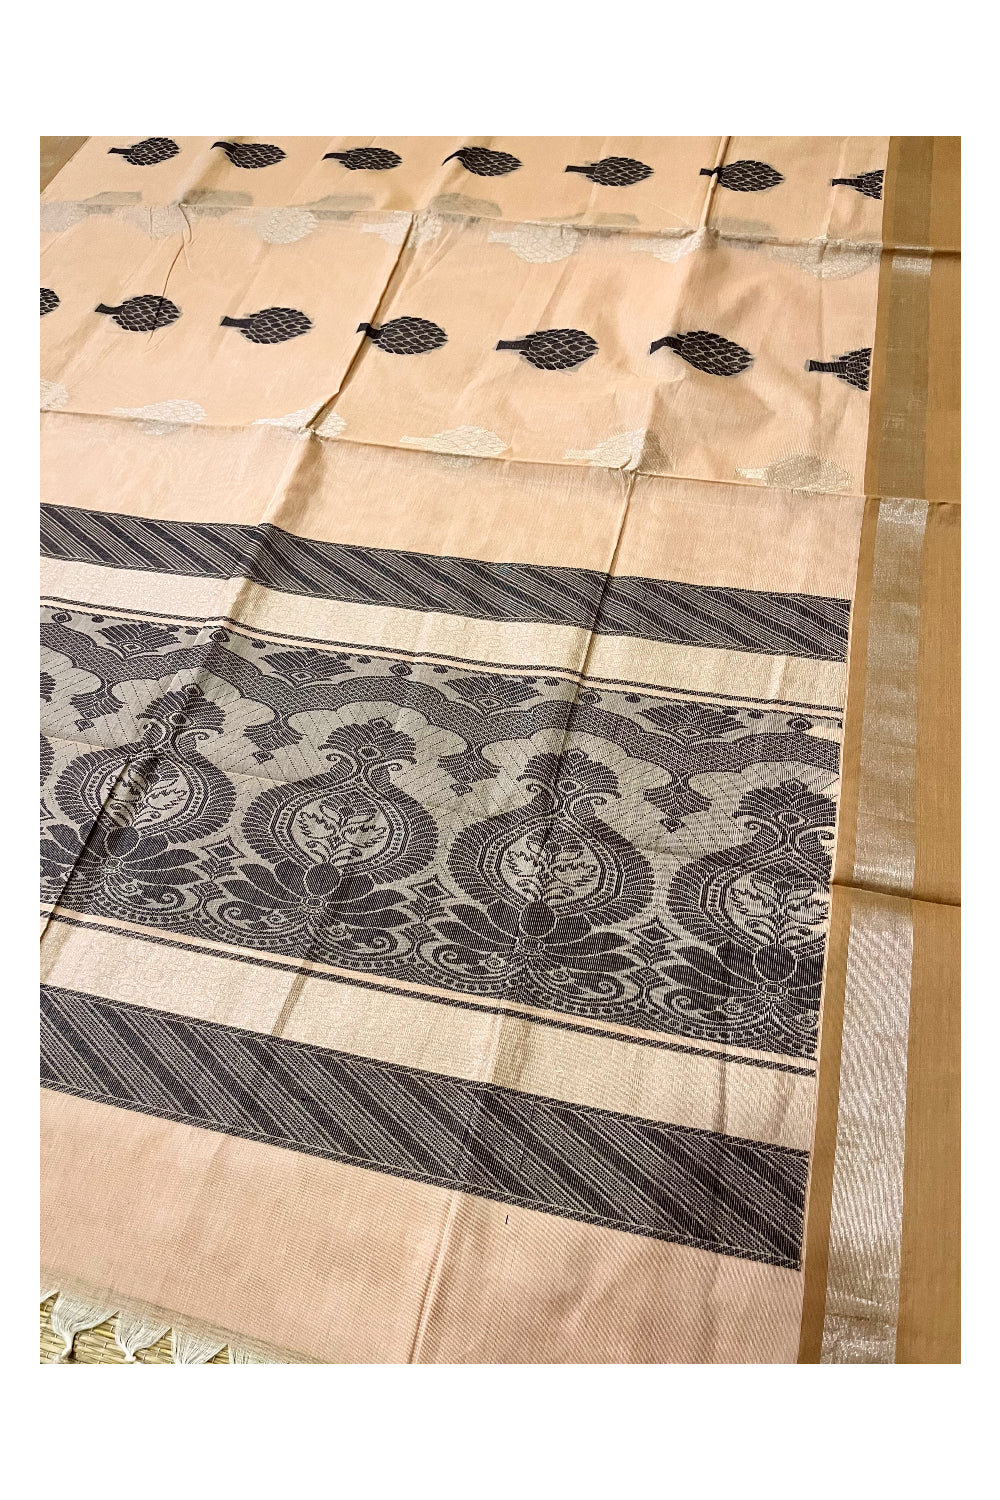 Southloom Light Brown Cotton Saree with Floral Woven Designs